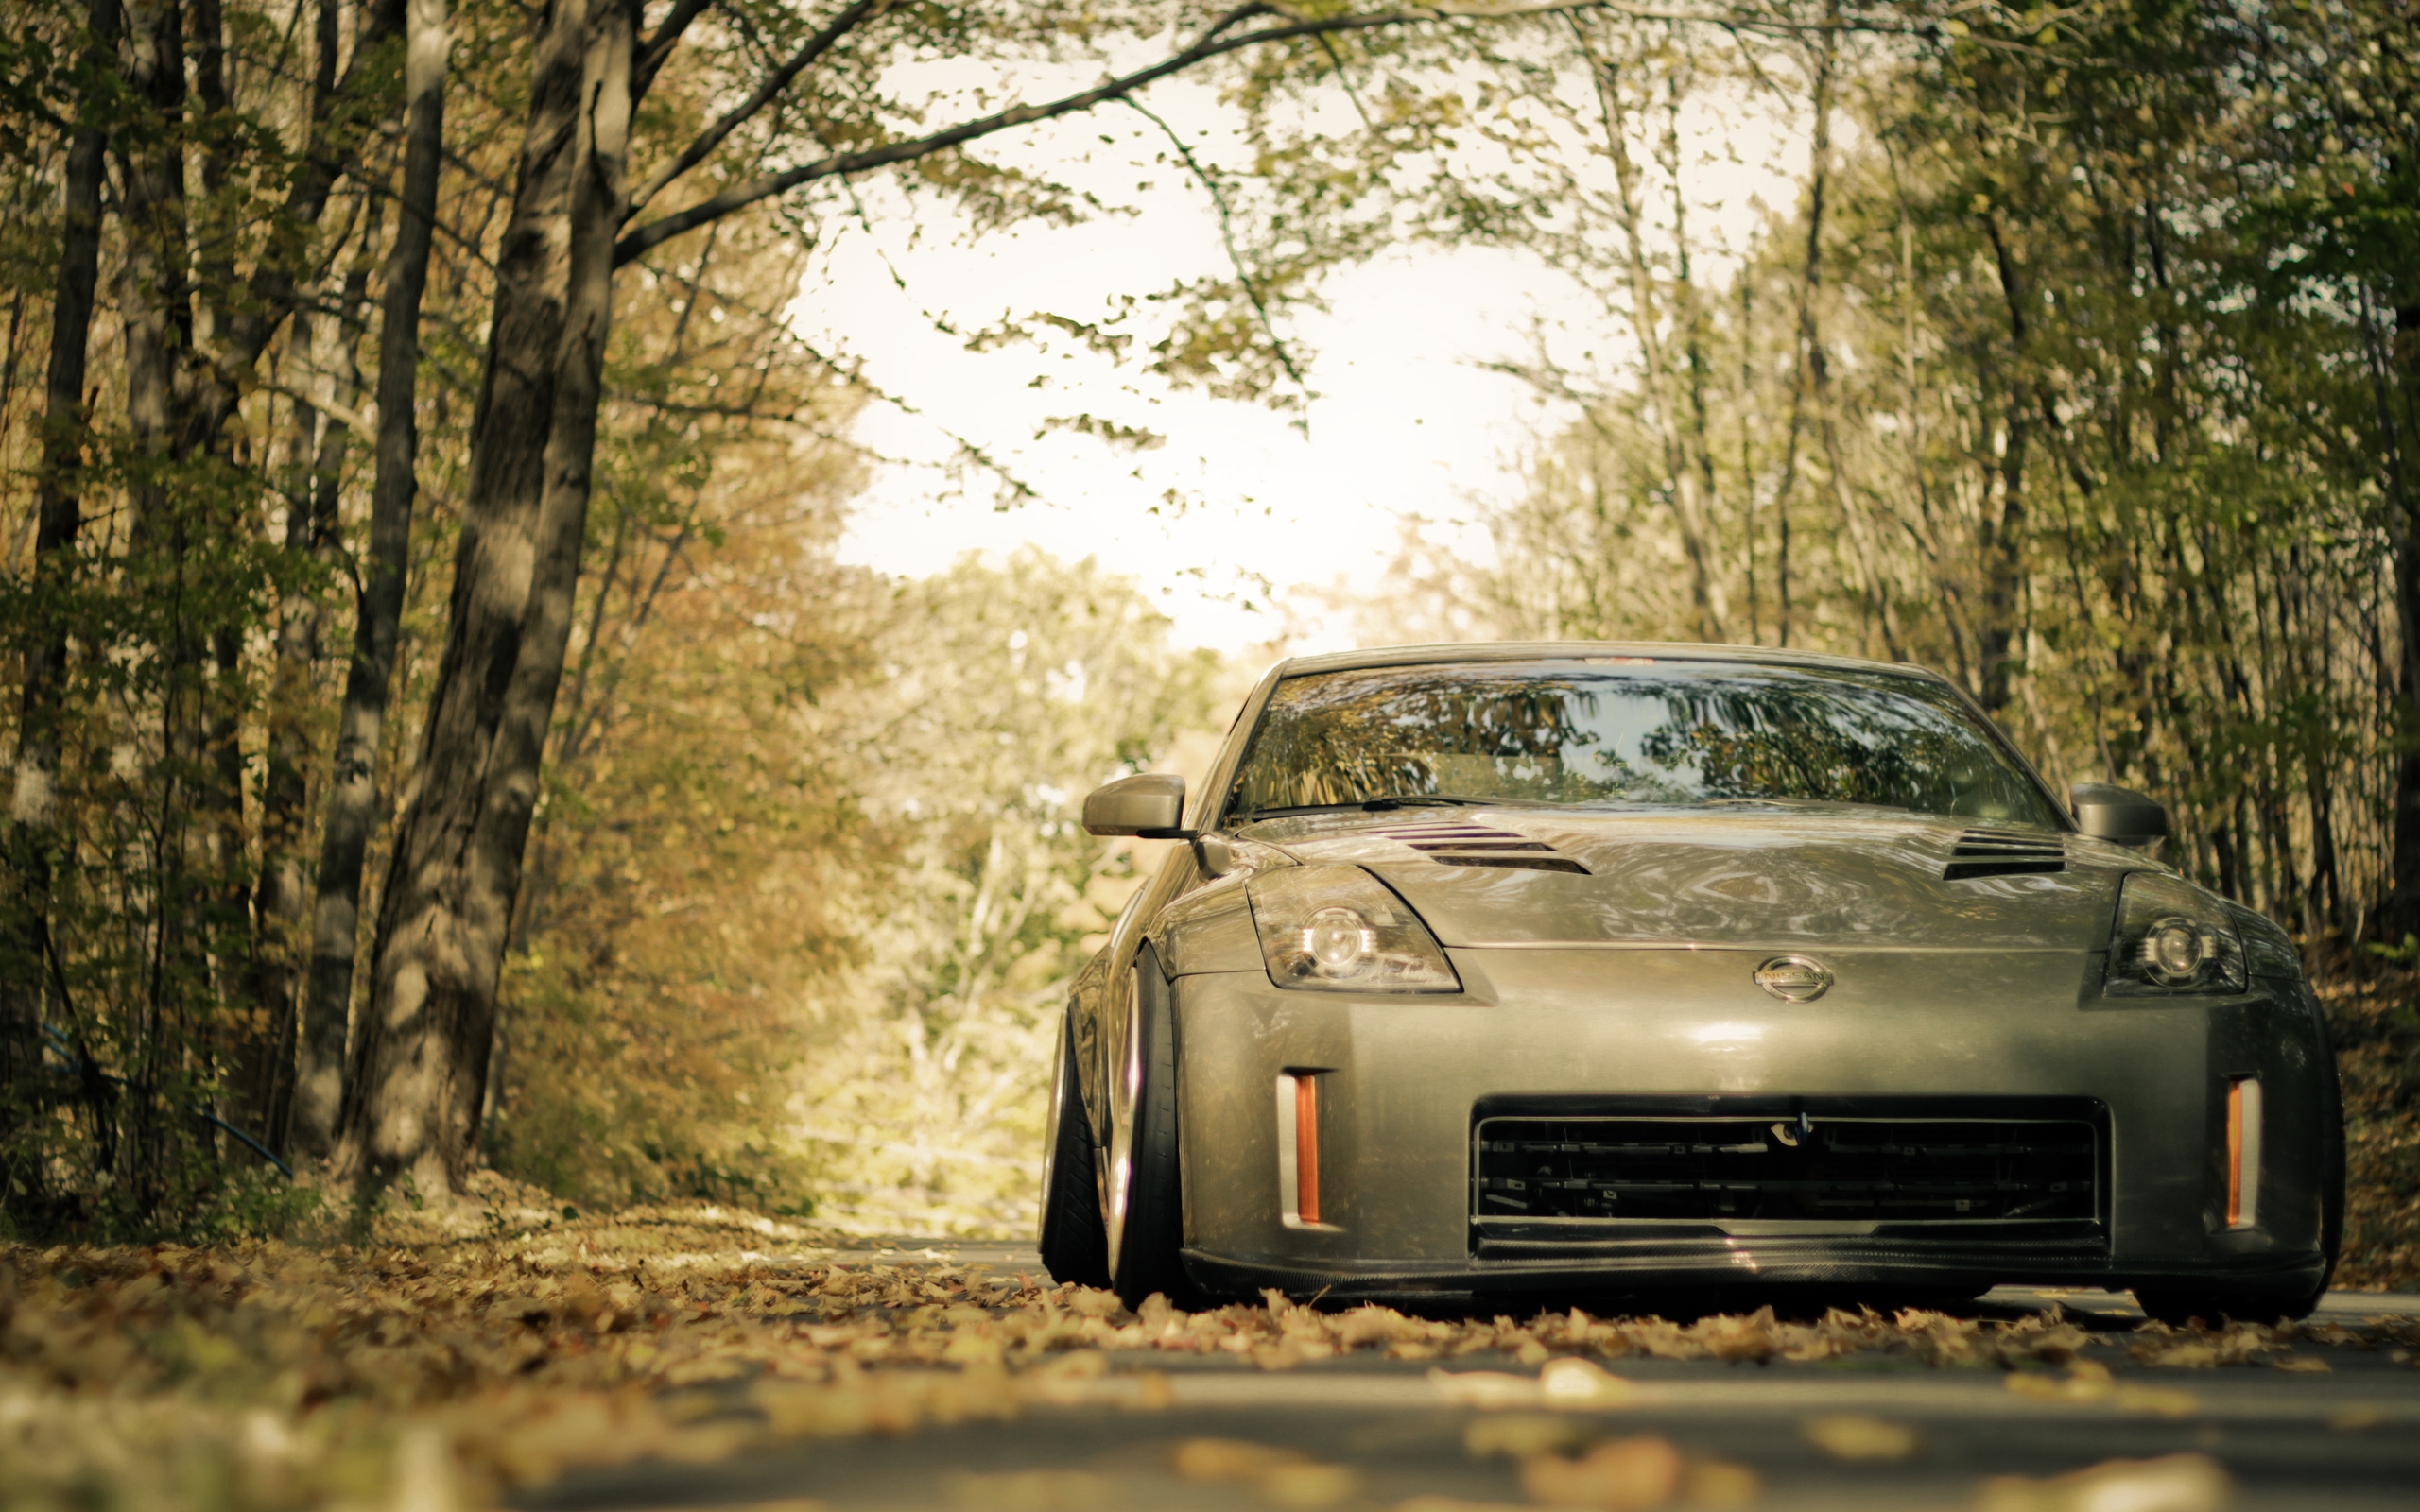 Nissan 350Z Wallpapers and Background Images   stmednet 2560x1600